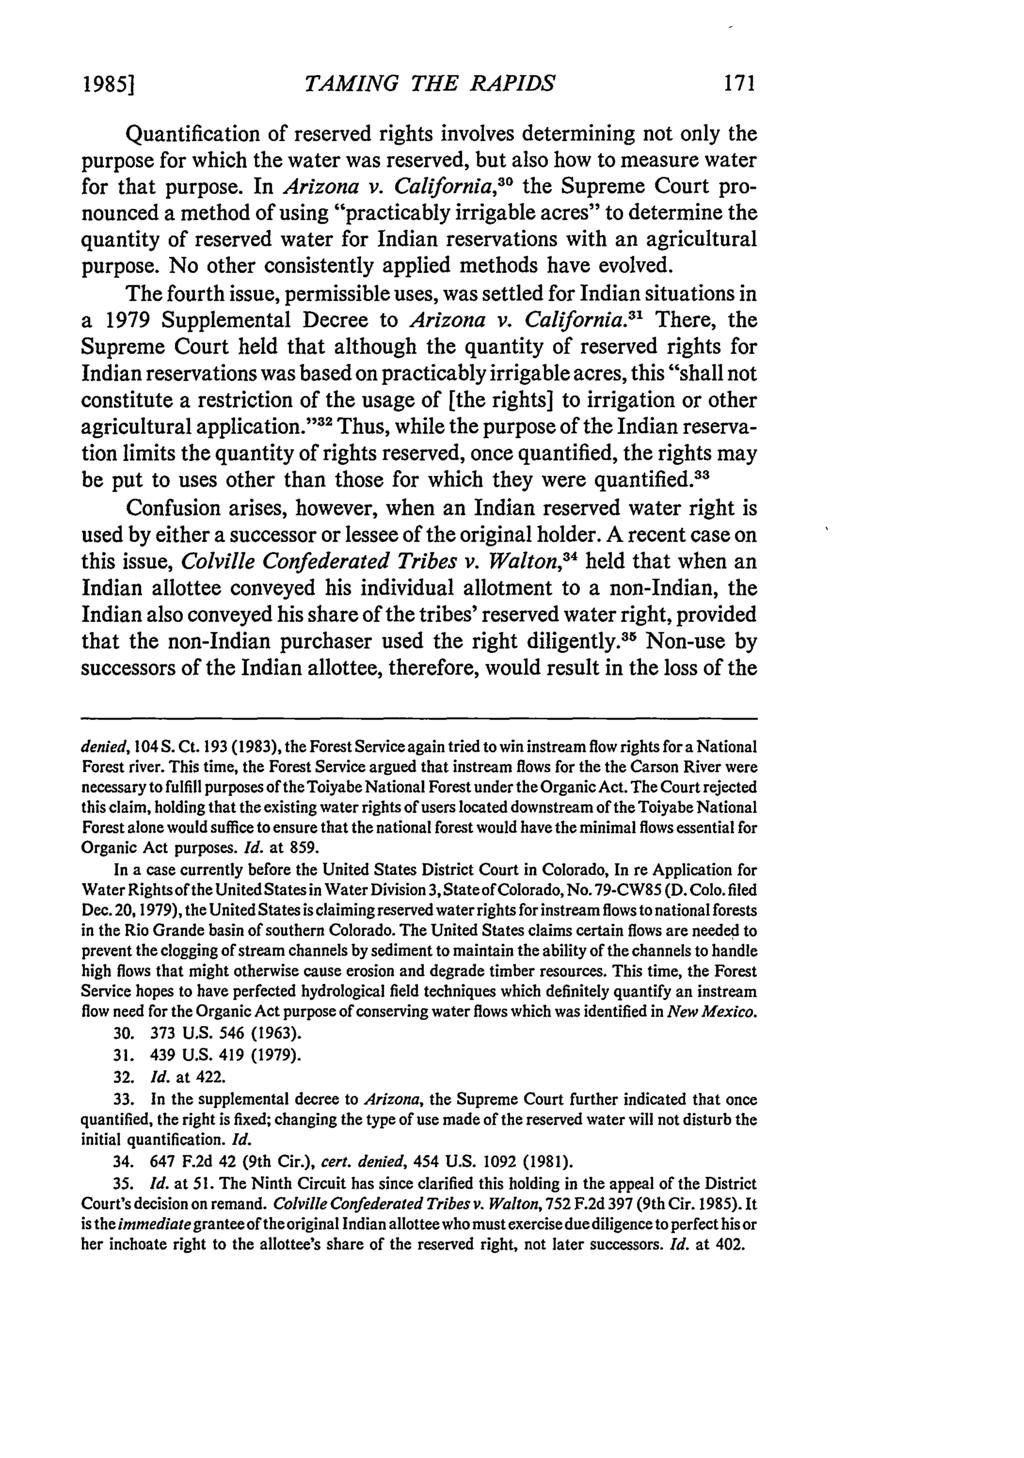 1985] TAMING THE RAPIDS Quantification of reserved rights involves determining not only the purpose for which the water was reserved, but also how to measure water 3 0 for that purpose. In Arizona v.